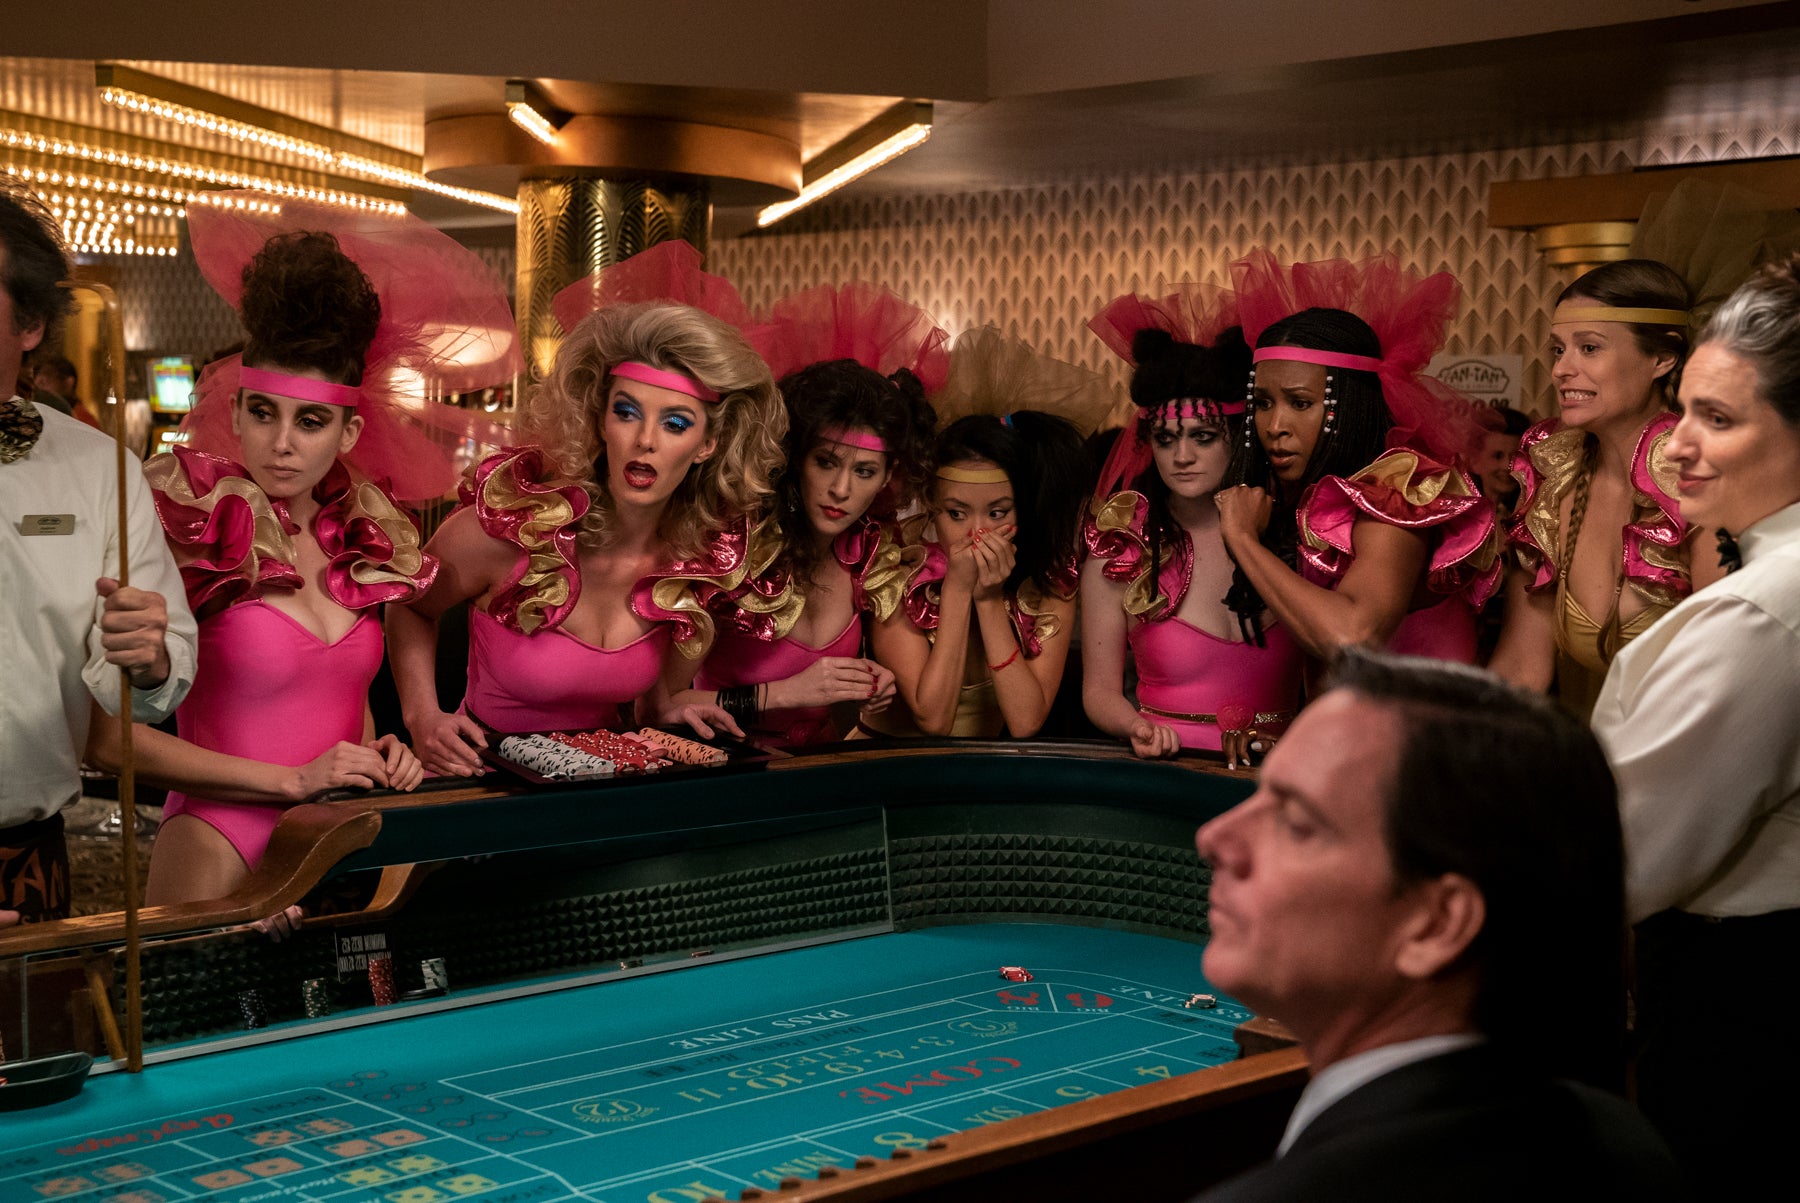 A photo from Netflix’s GLOW with wrestlers gathered around a craps table in Vegas while dressed in frilly pink-and-gold stage costumes. Cherry Bang had just rolled the dice, and they’re all watching in anticipation to see if she won. 